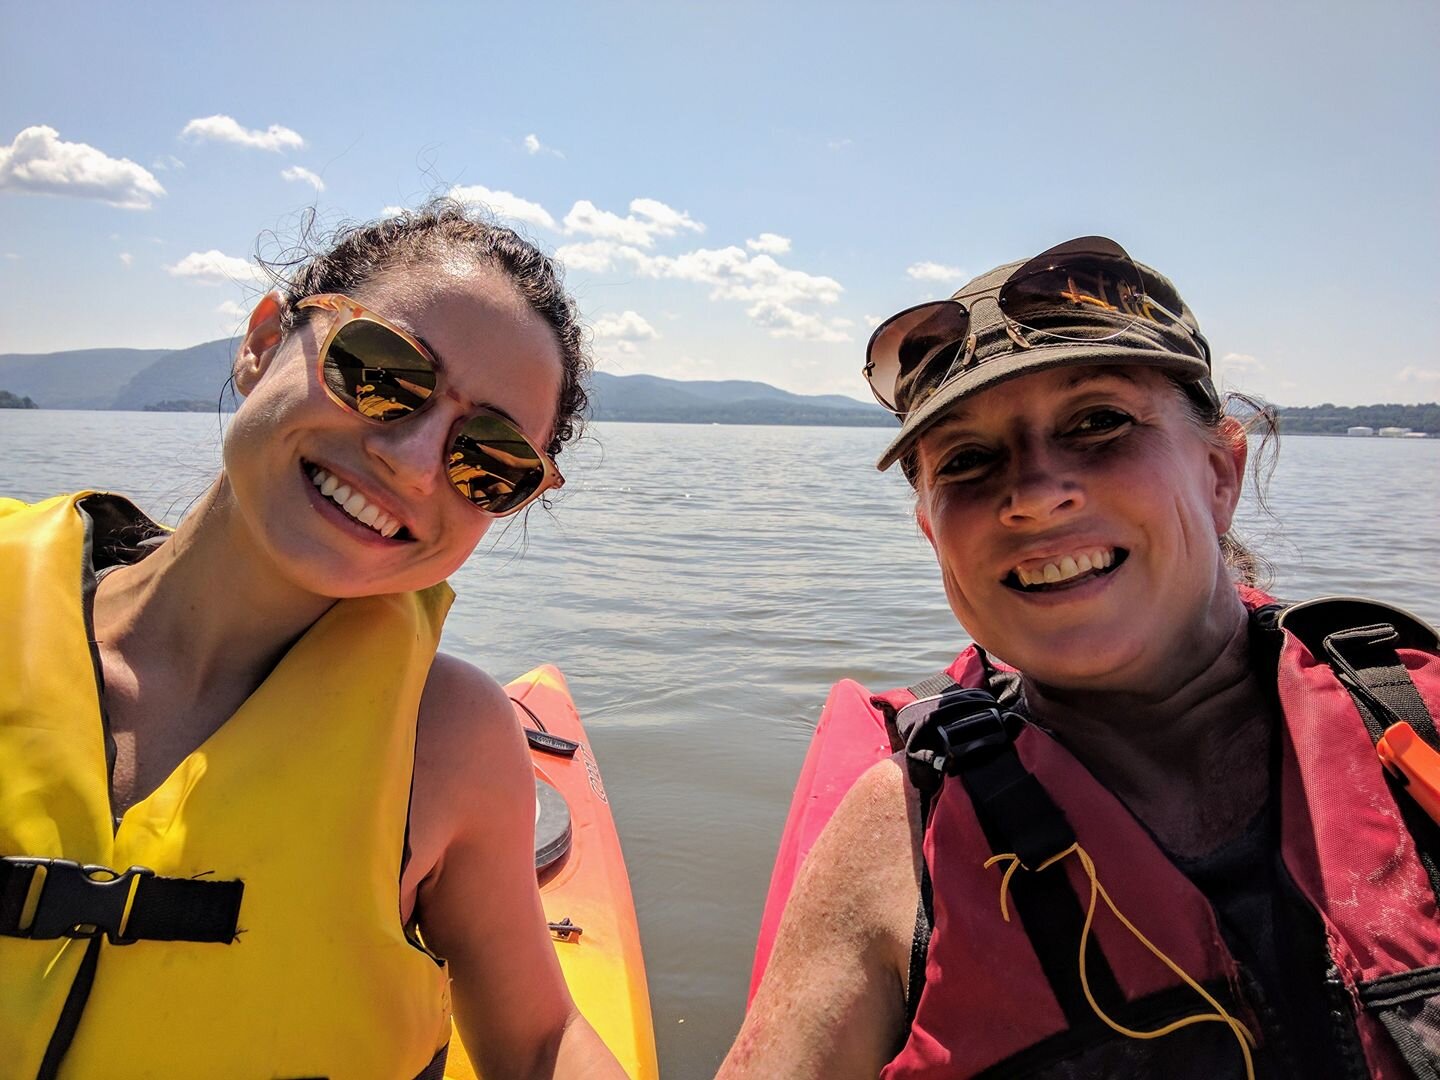 kayaking the Hudson River with my daughter Aug 2017.jpg